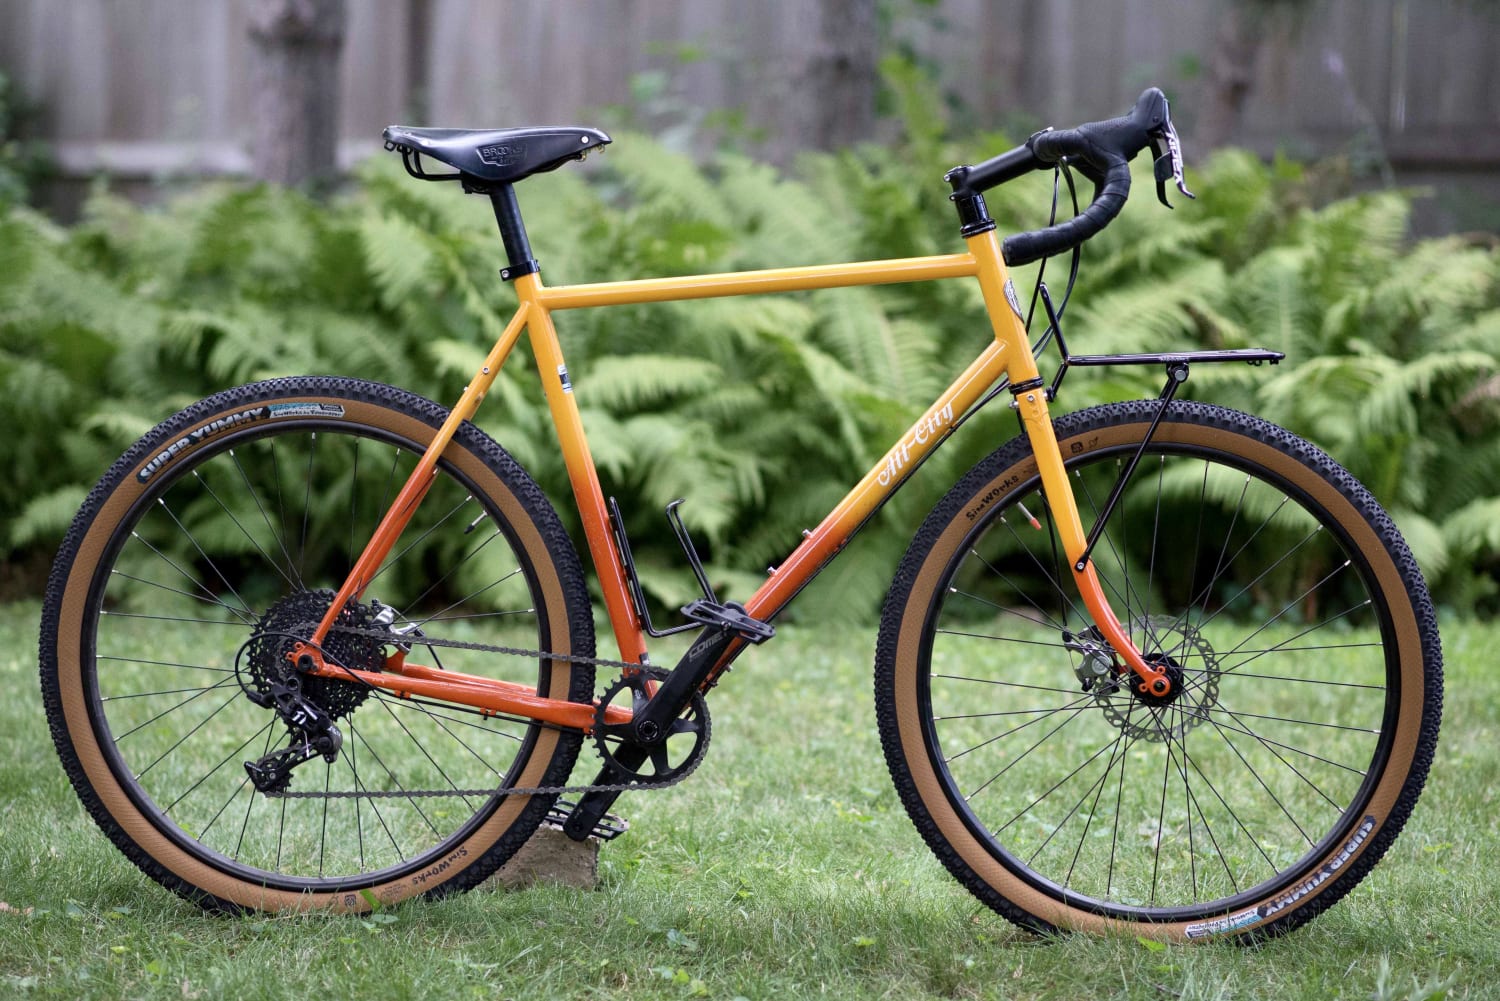 2018 All-City Gorilla Monsoon with a few upgrades. Next up bags!